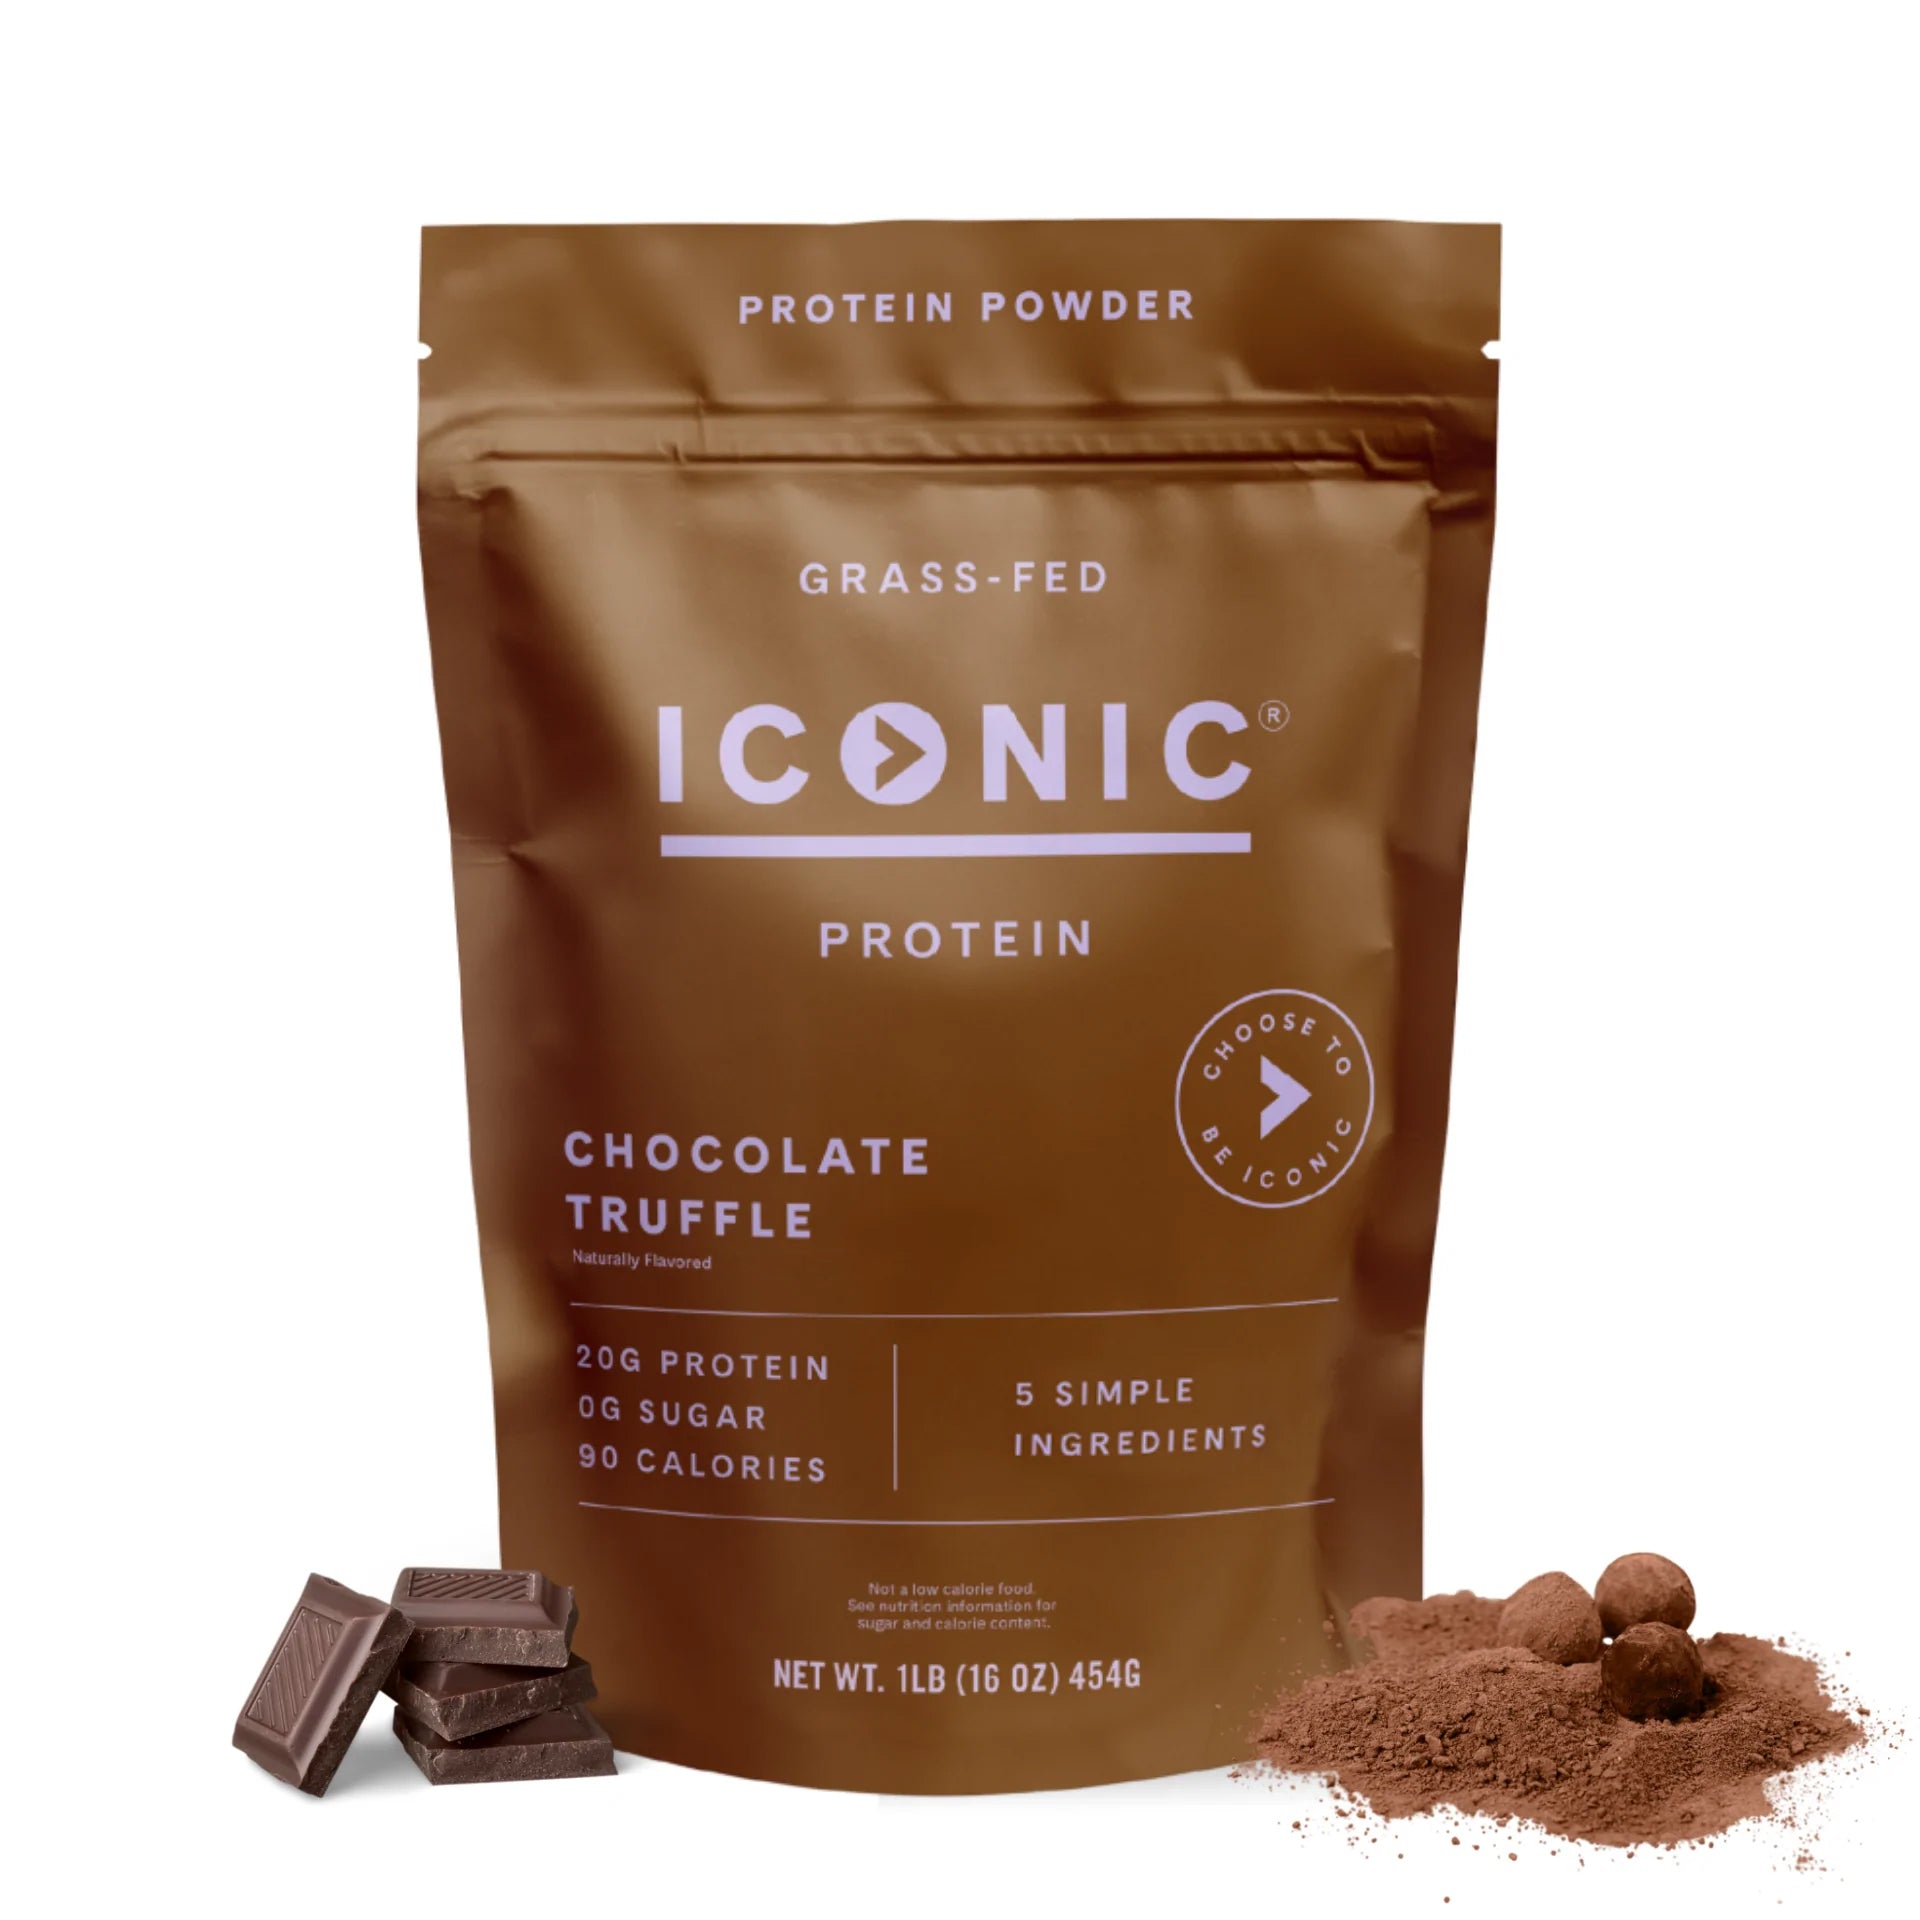 I tried Iconic Protein's drink and here's what I thought